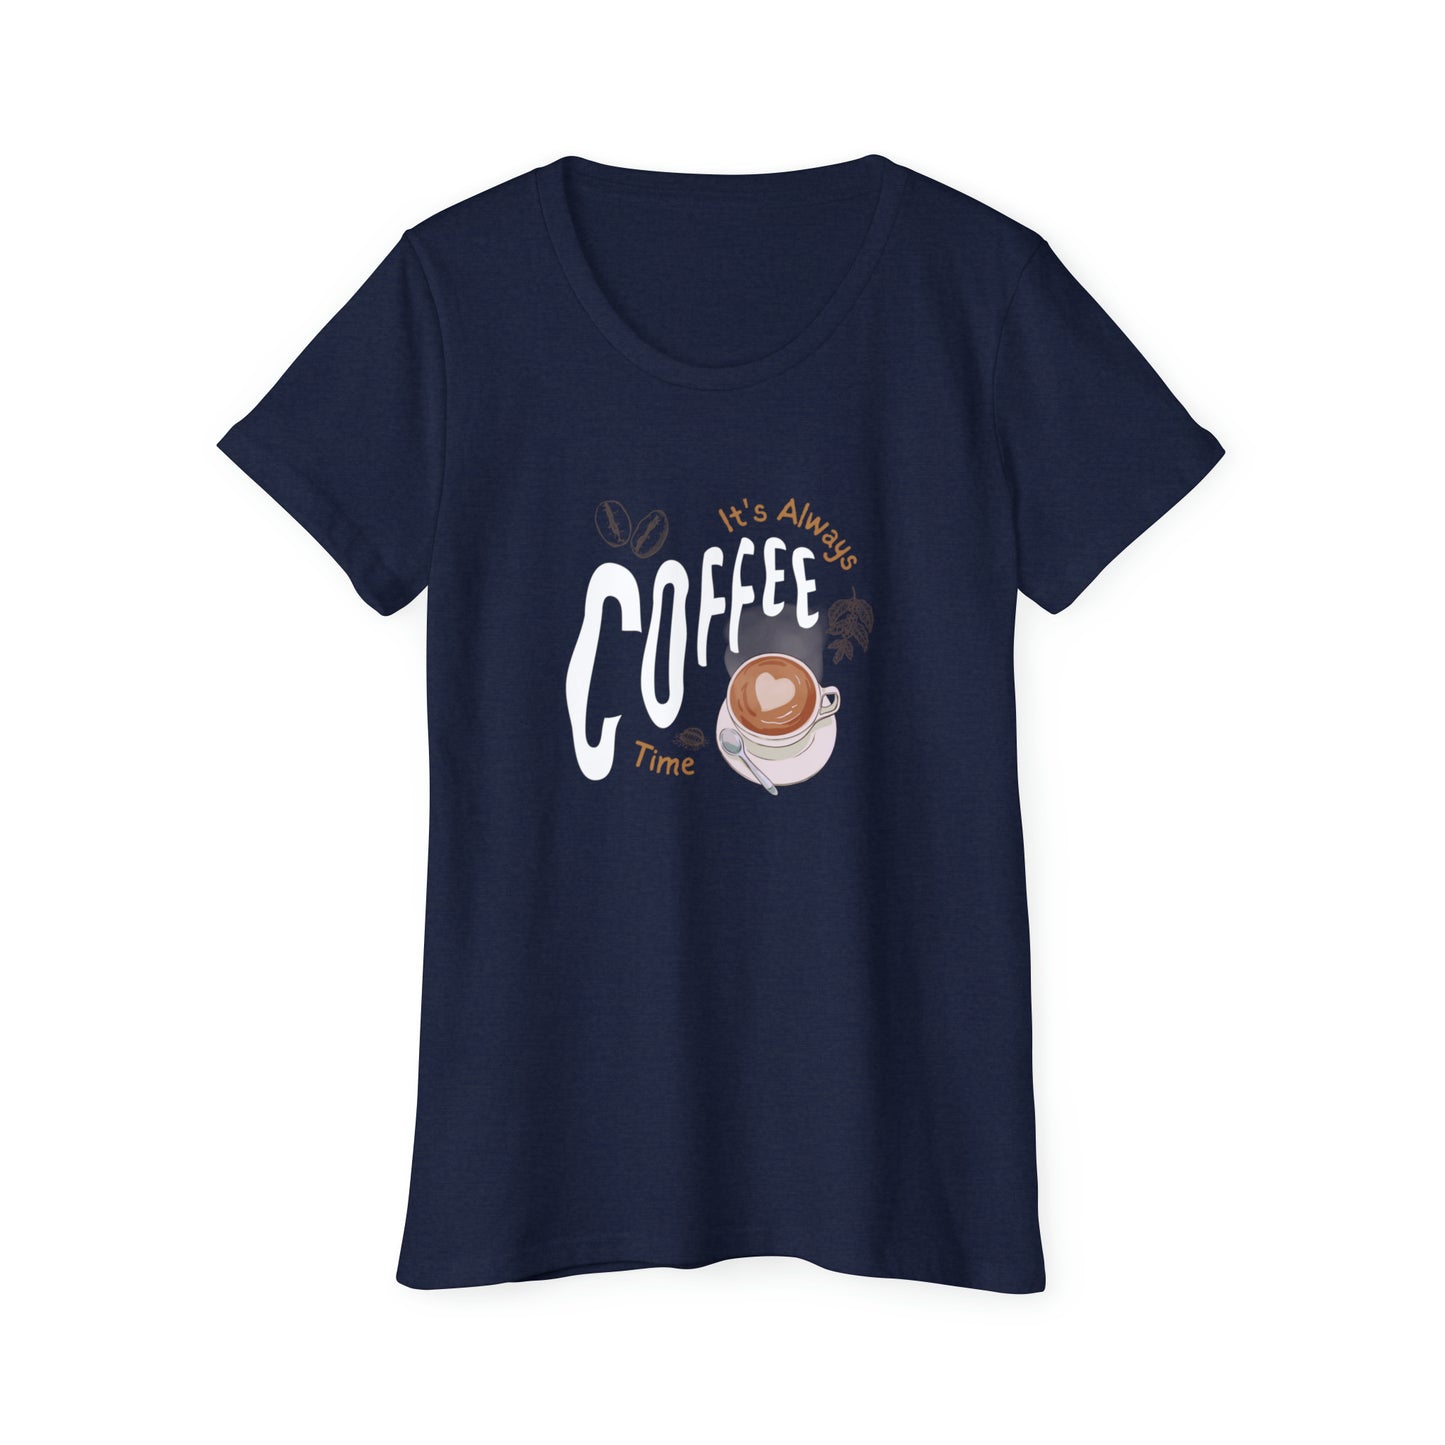 It's Always Coffee Time  Organic Cotton Graphic Tee for Women